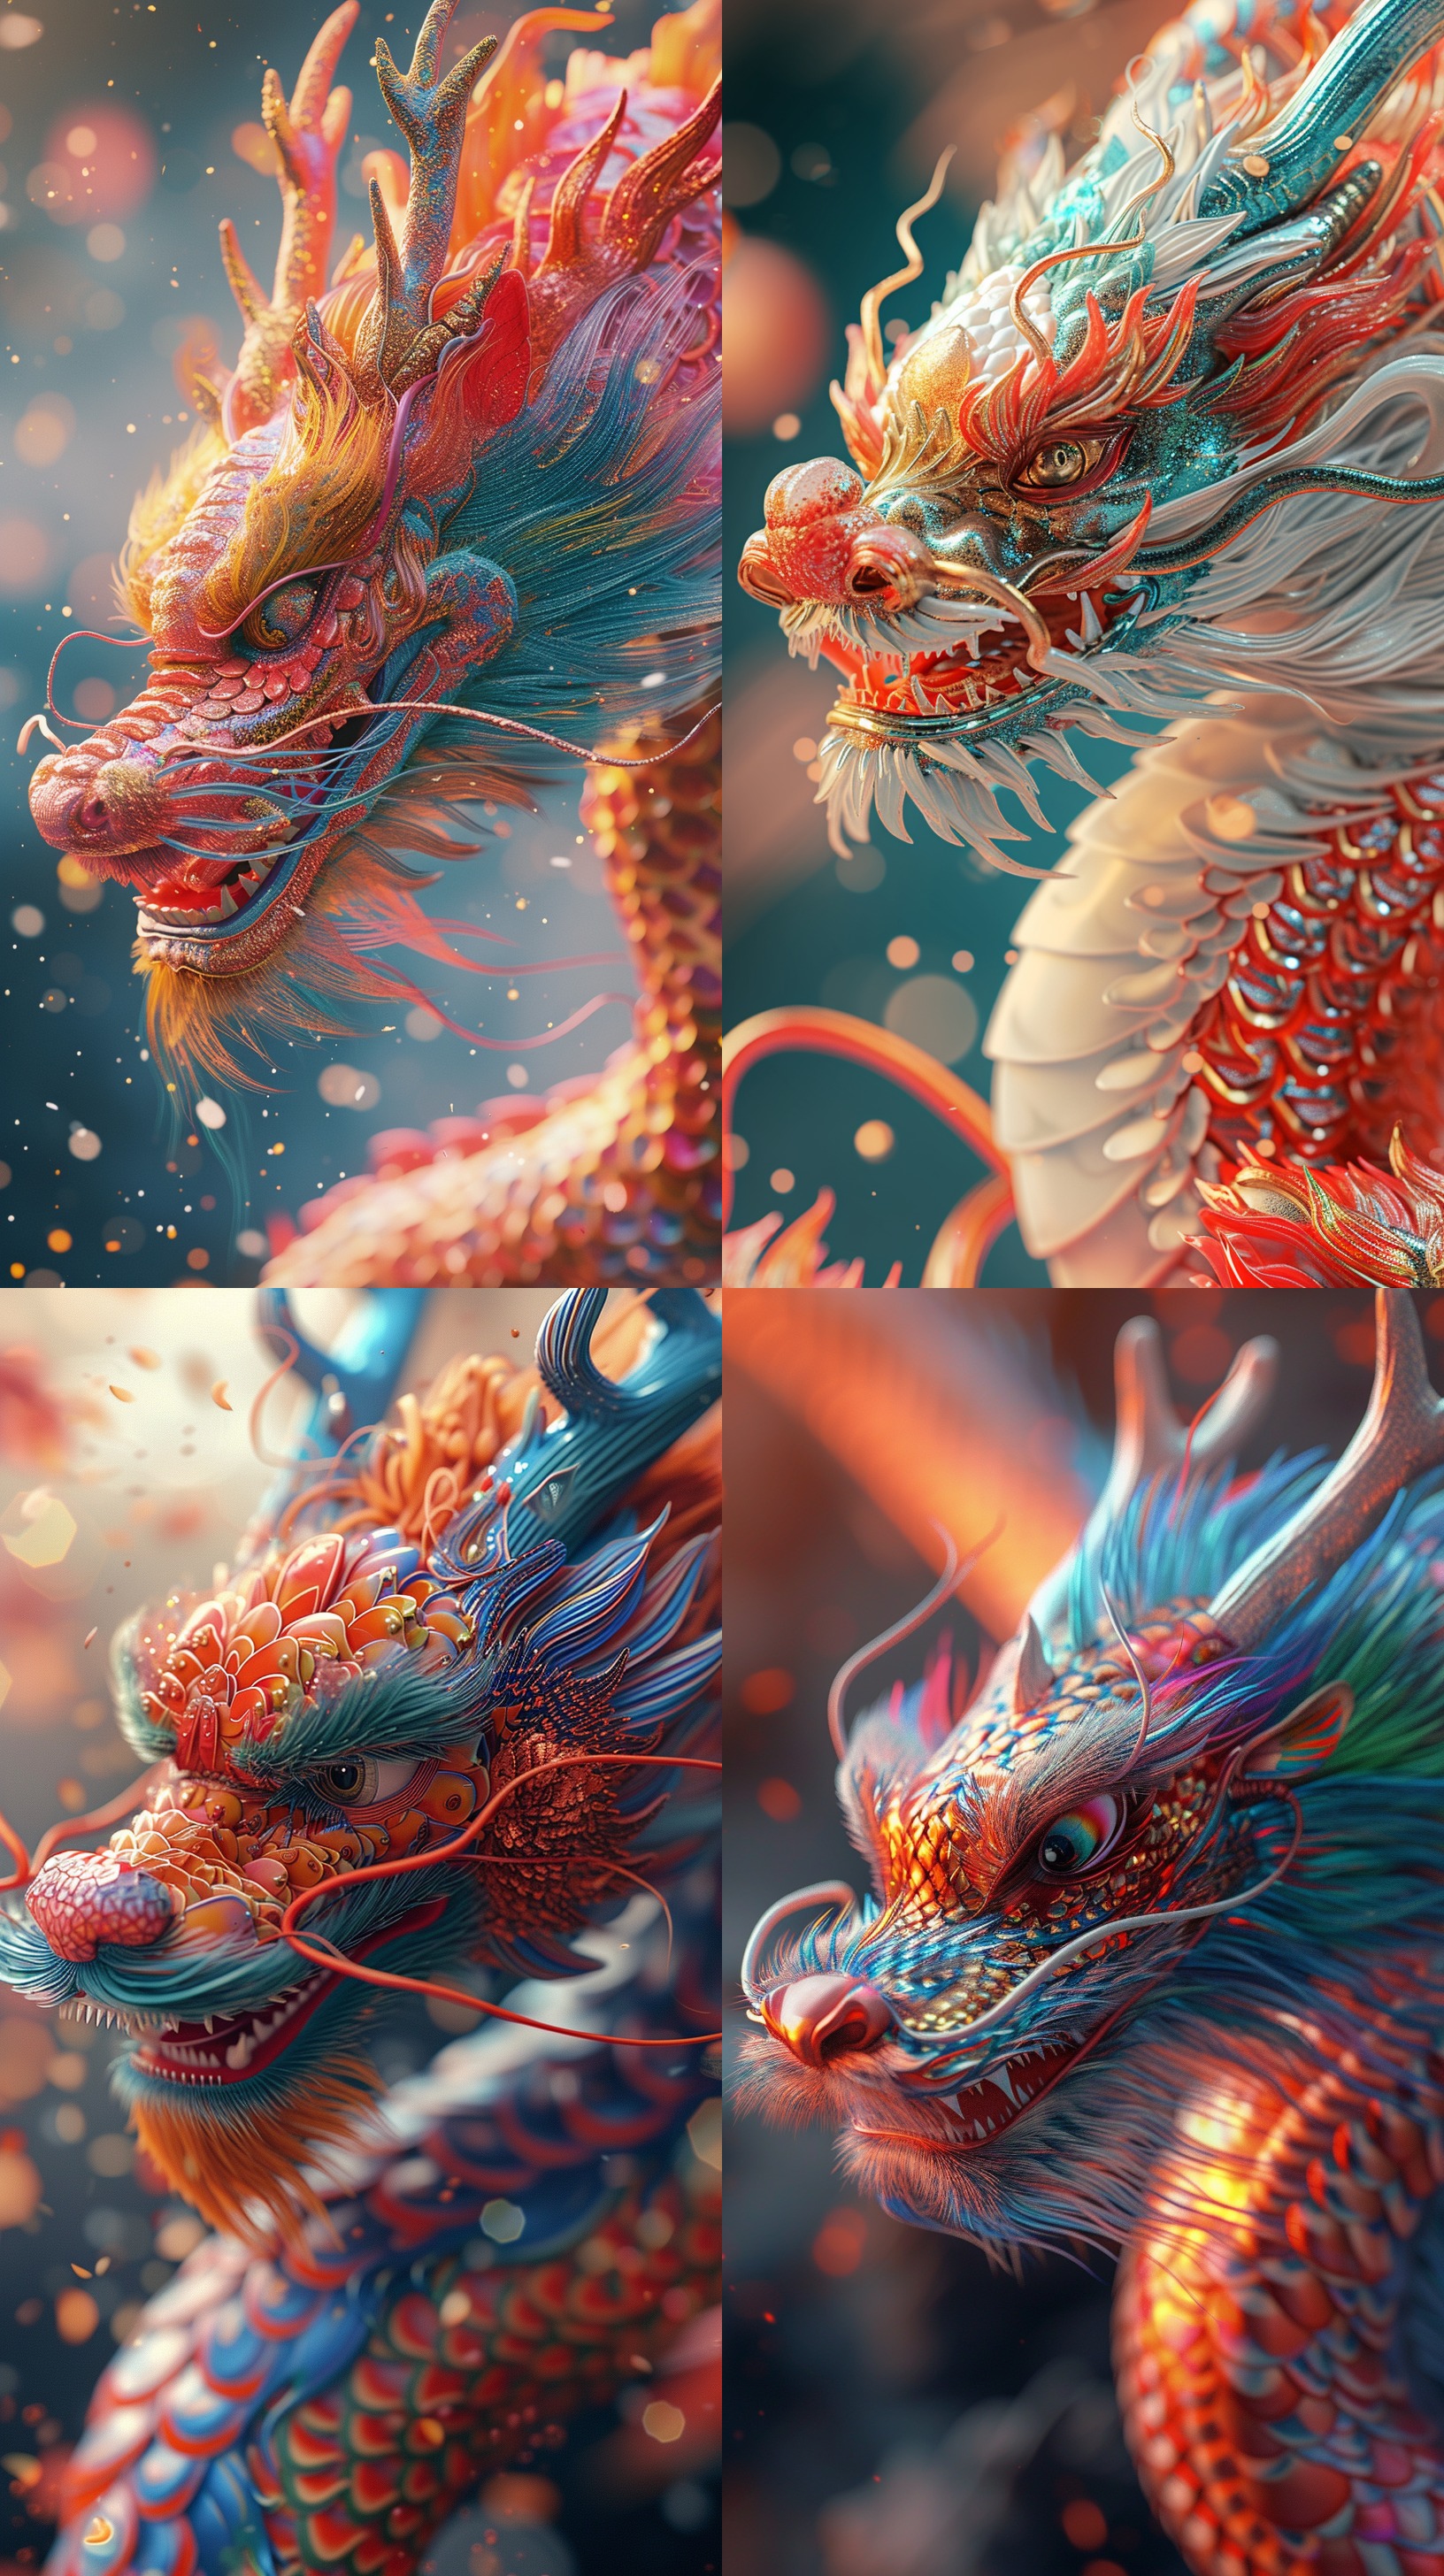 A muti-color Chinese dragon